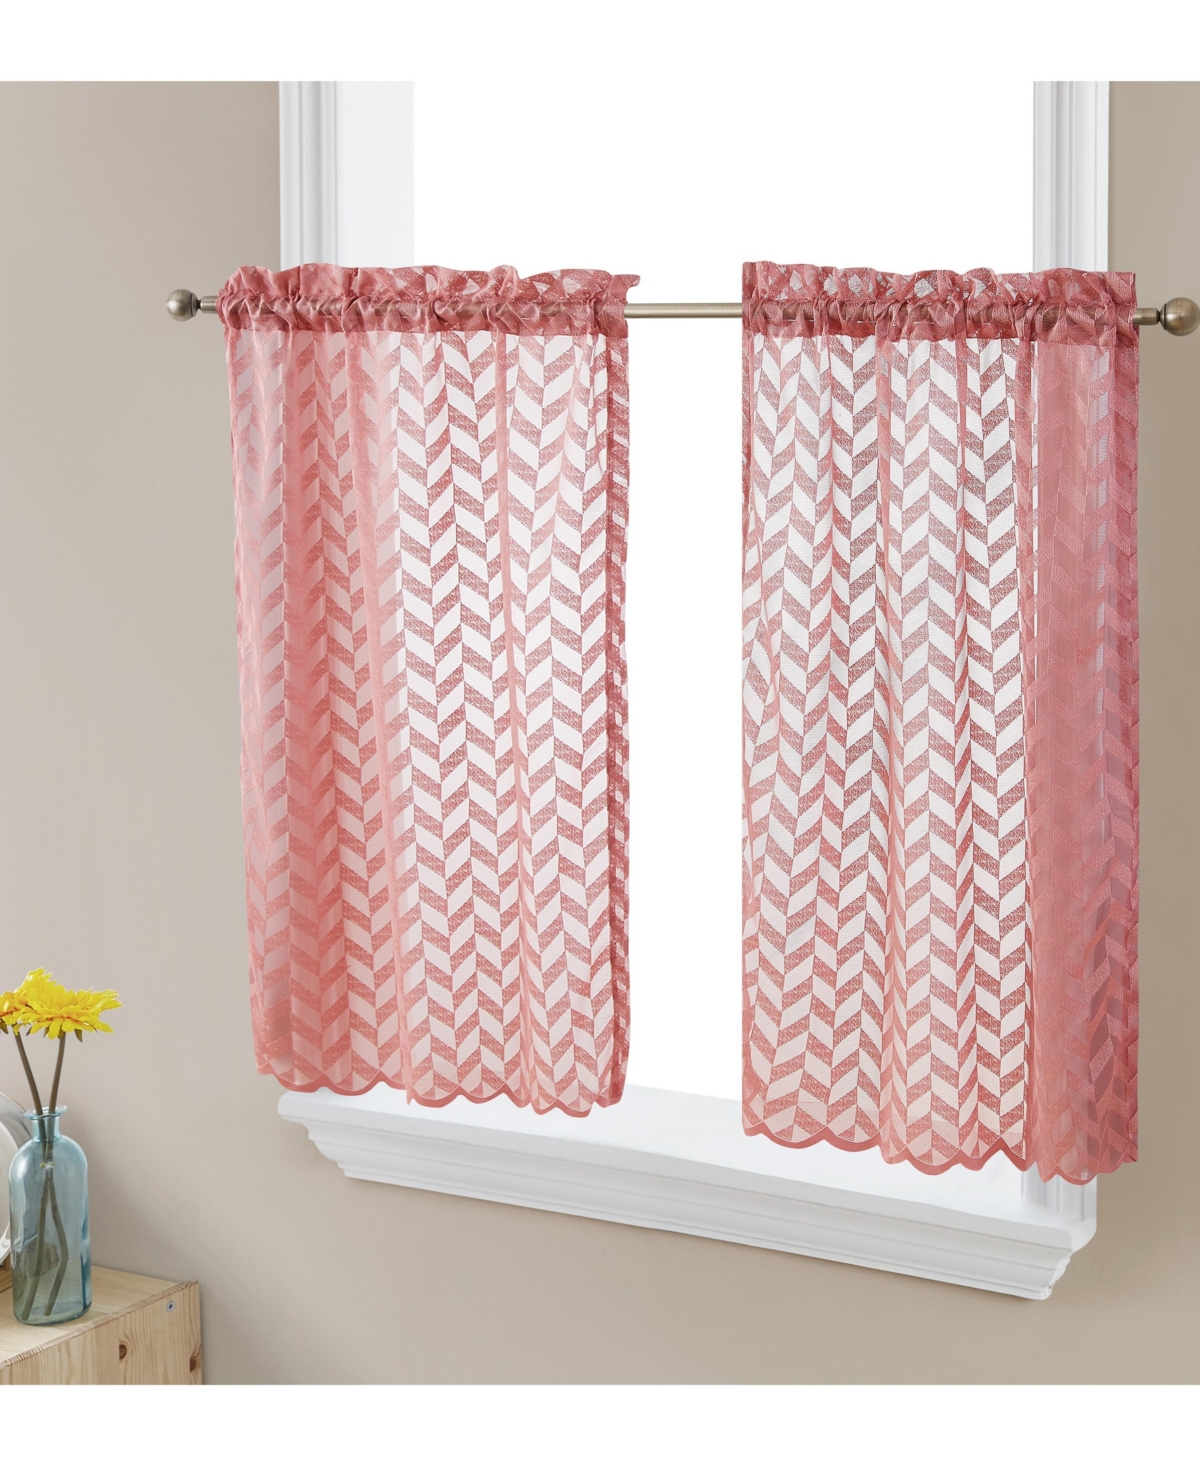 Herringbone Lace Sheer Kitchen Cafe Curtain Tiers for Small Windows & Bathroom - Blush pink